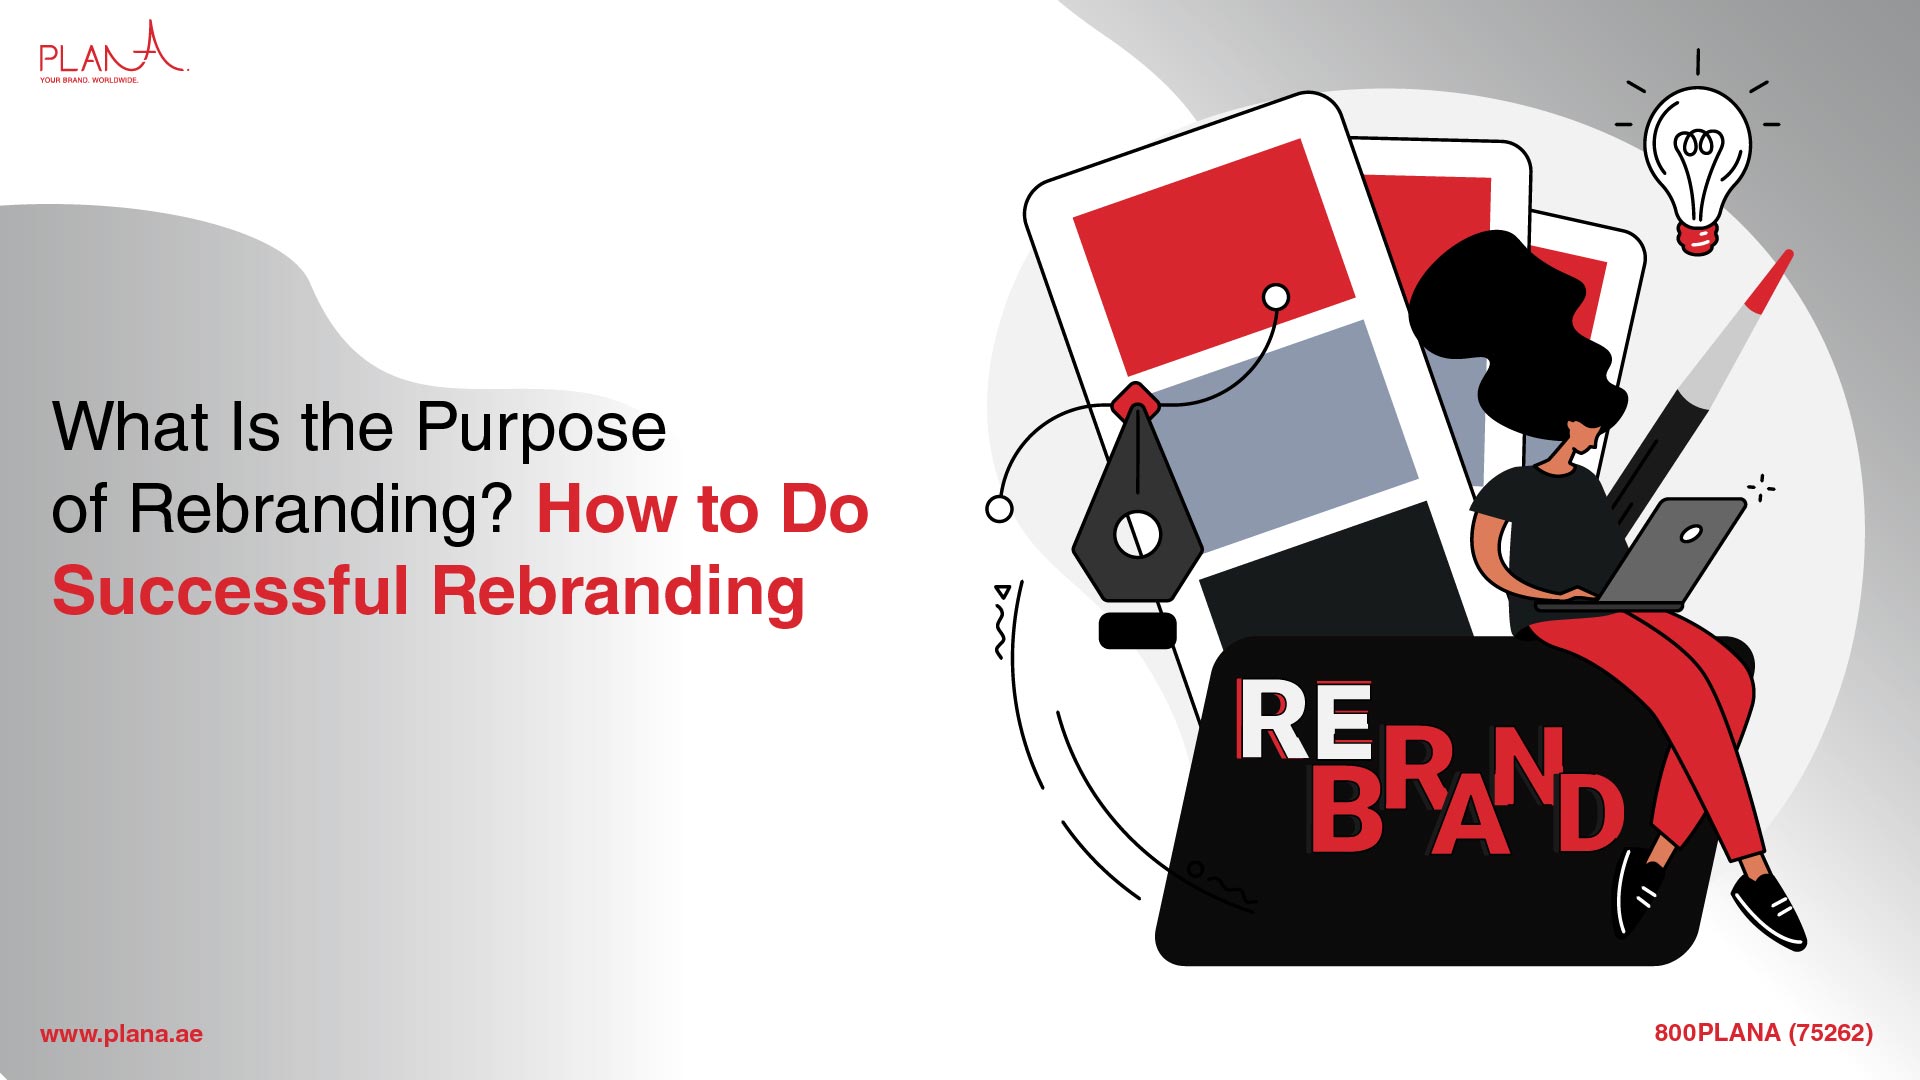 What Is the Purpose of Rebranding? How to Do Successful Rebranding